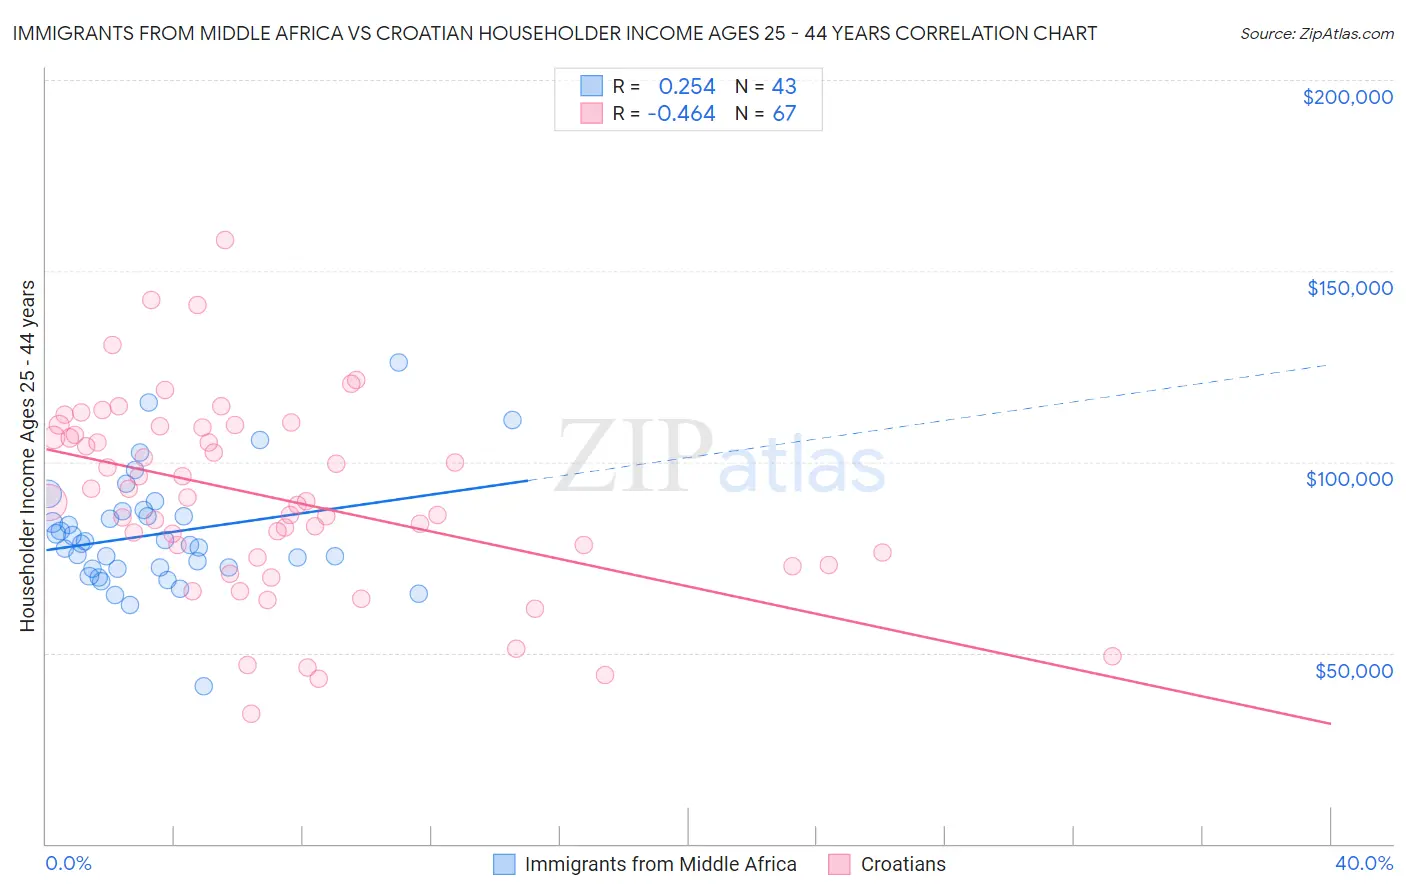 Immigrants from Middle Africa vs Croatian Householder Income Ages 25 - 44 years